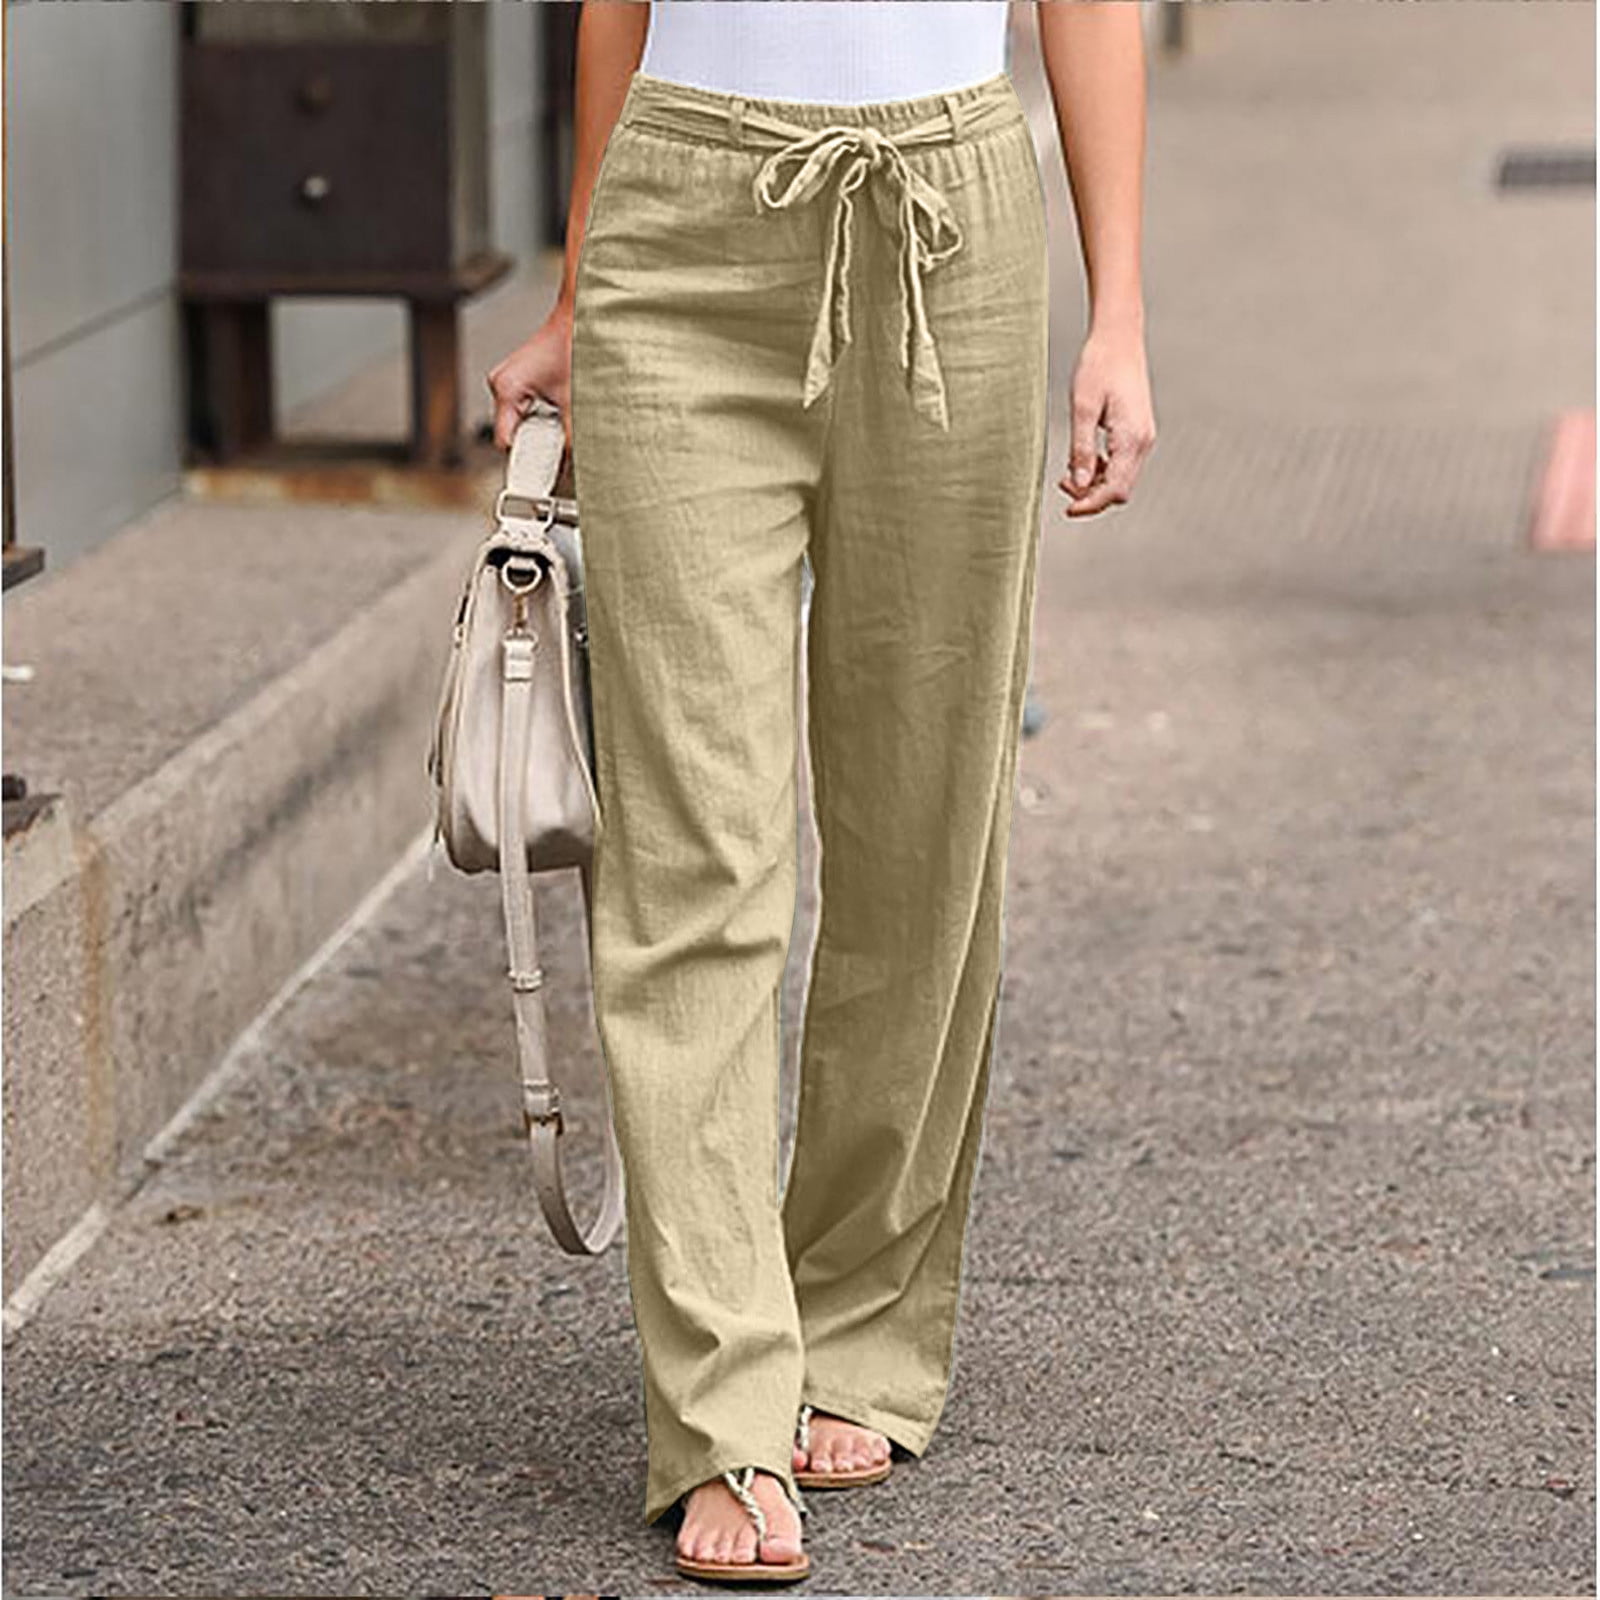 3 Pairs Of Lightweight Summer Pants To Shop Now (Wallet-Friendly